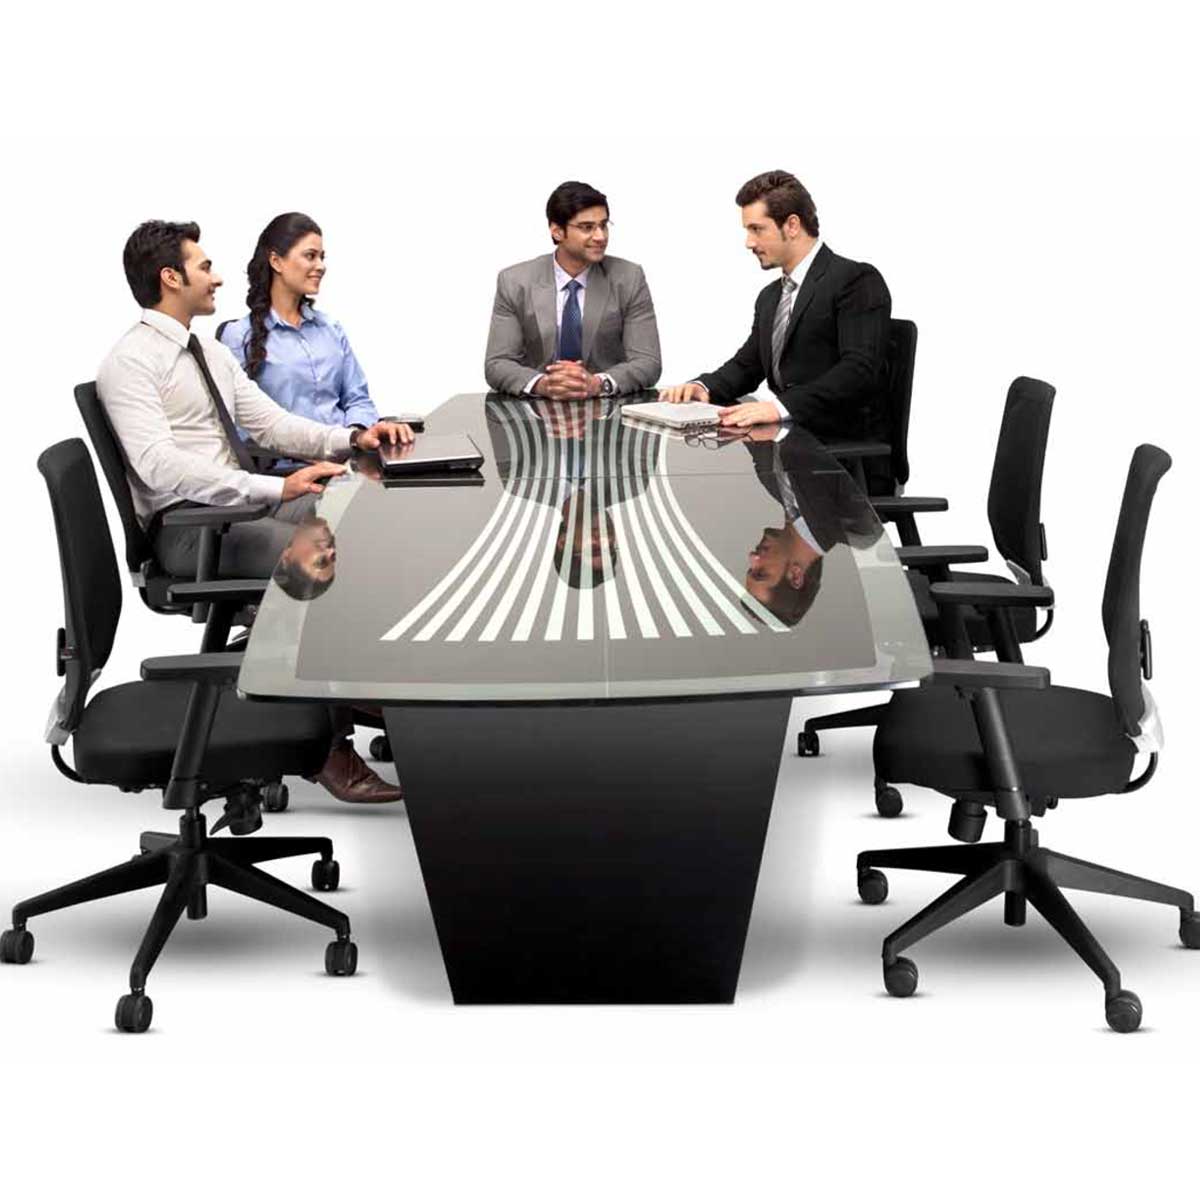 Metal Office Table Manufacturers, Suppliers in Kundli Industrial Area